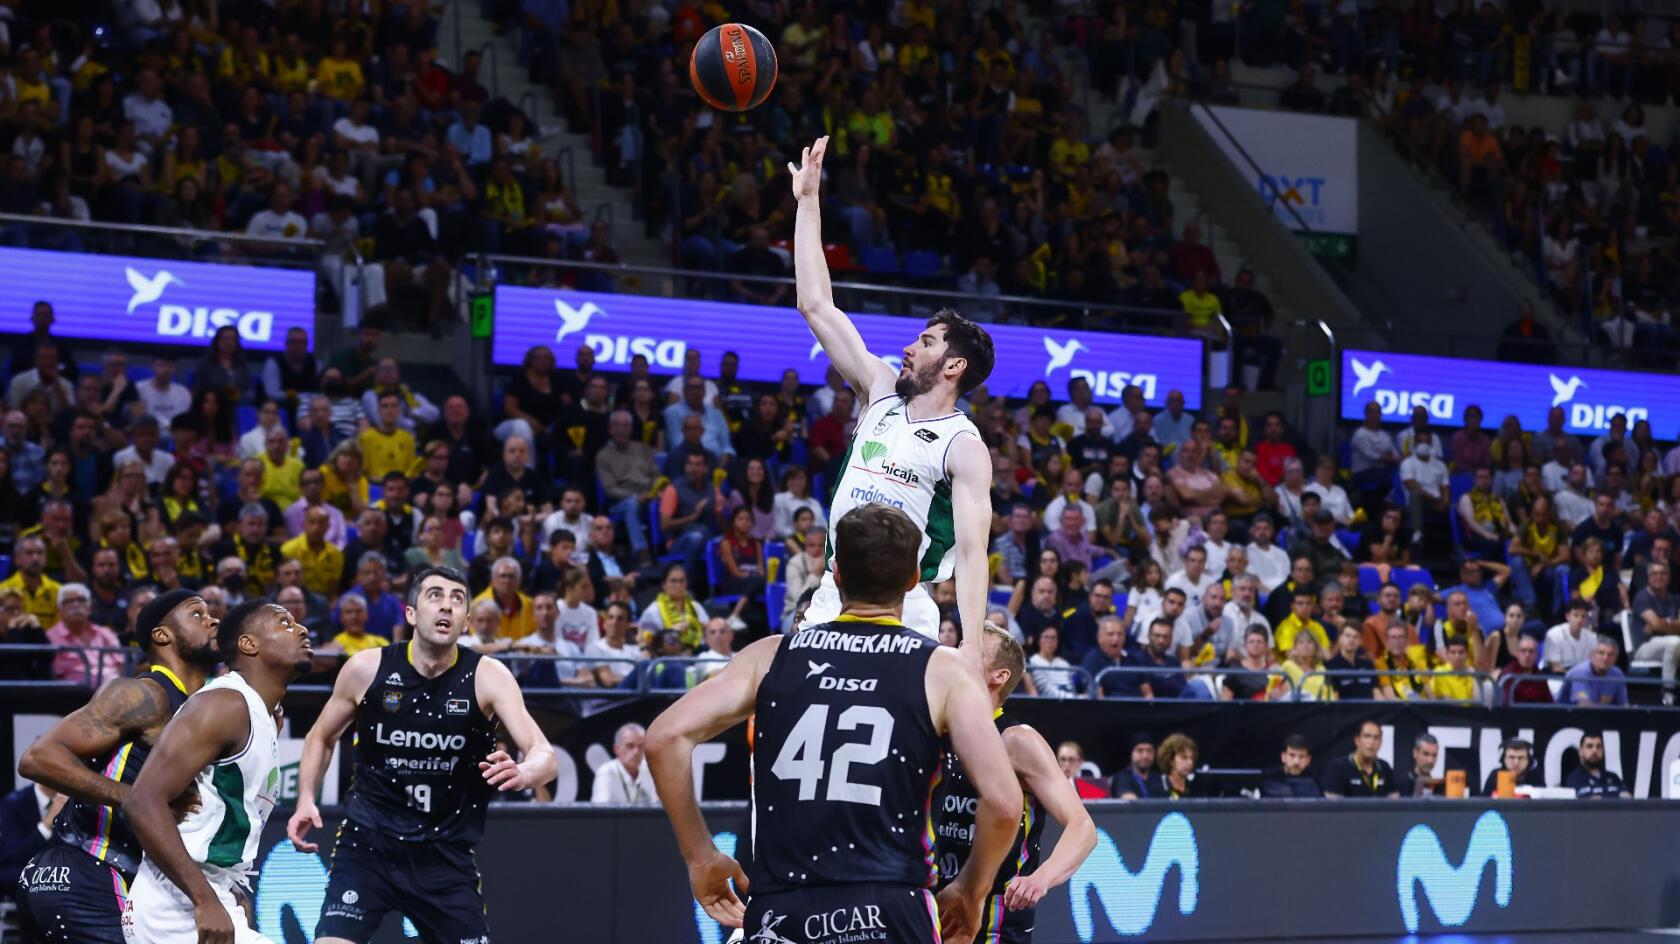 Unicaja flies to steal home court factor in Tenerife (59-72)